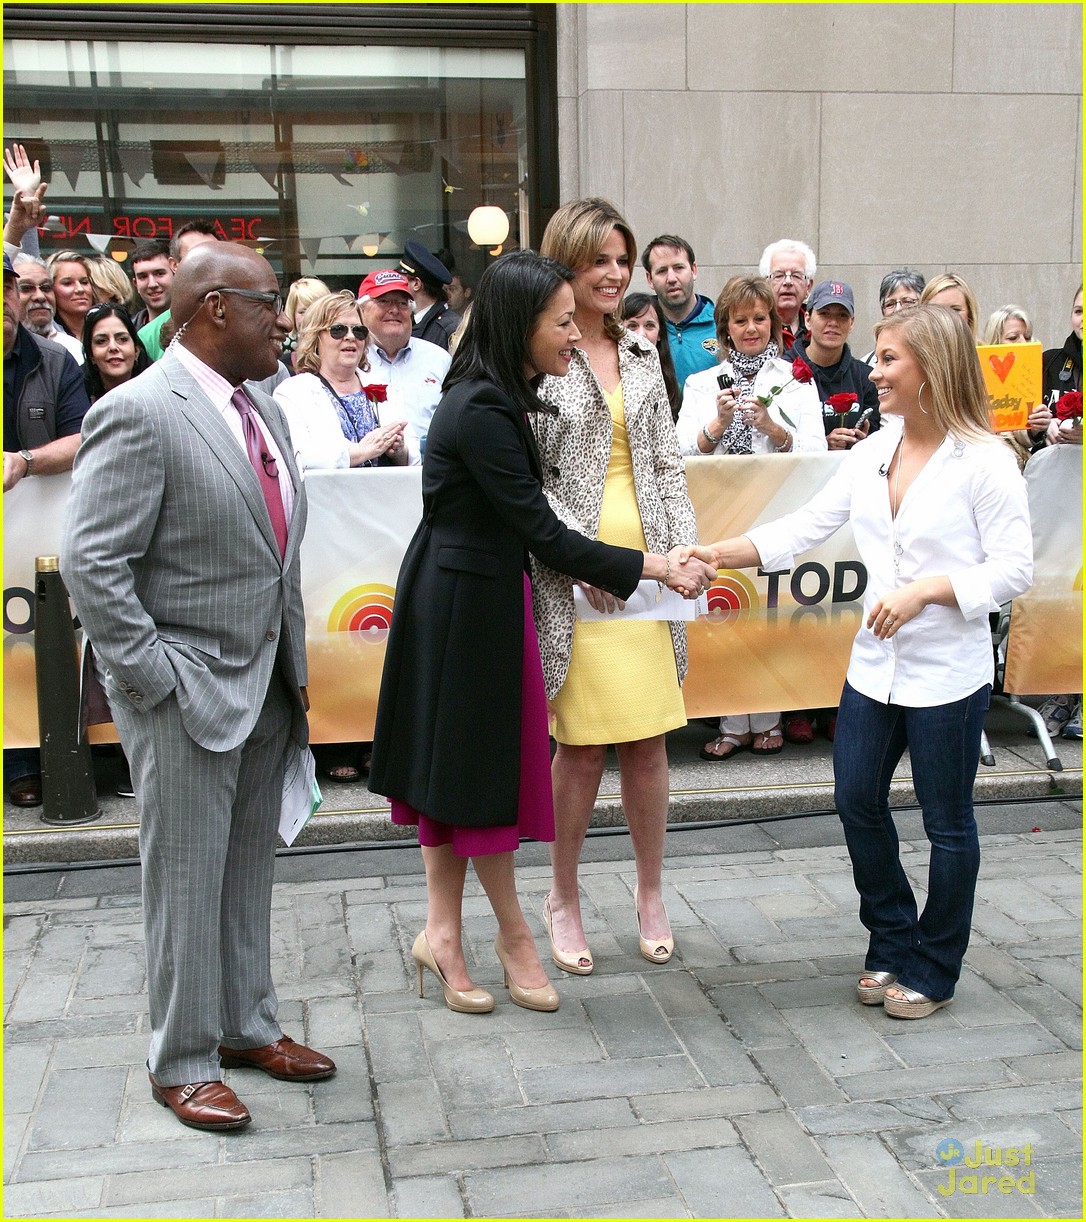 shawn johnson today show 10